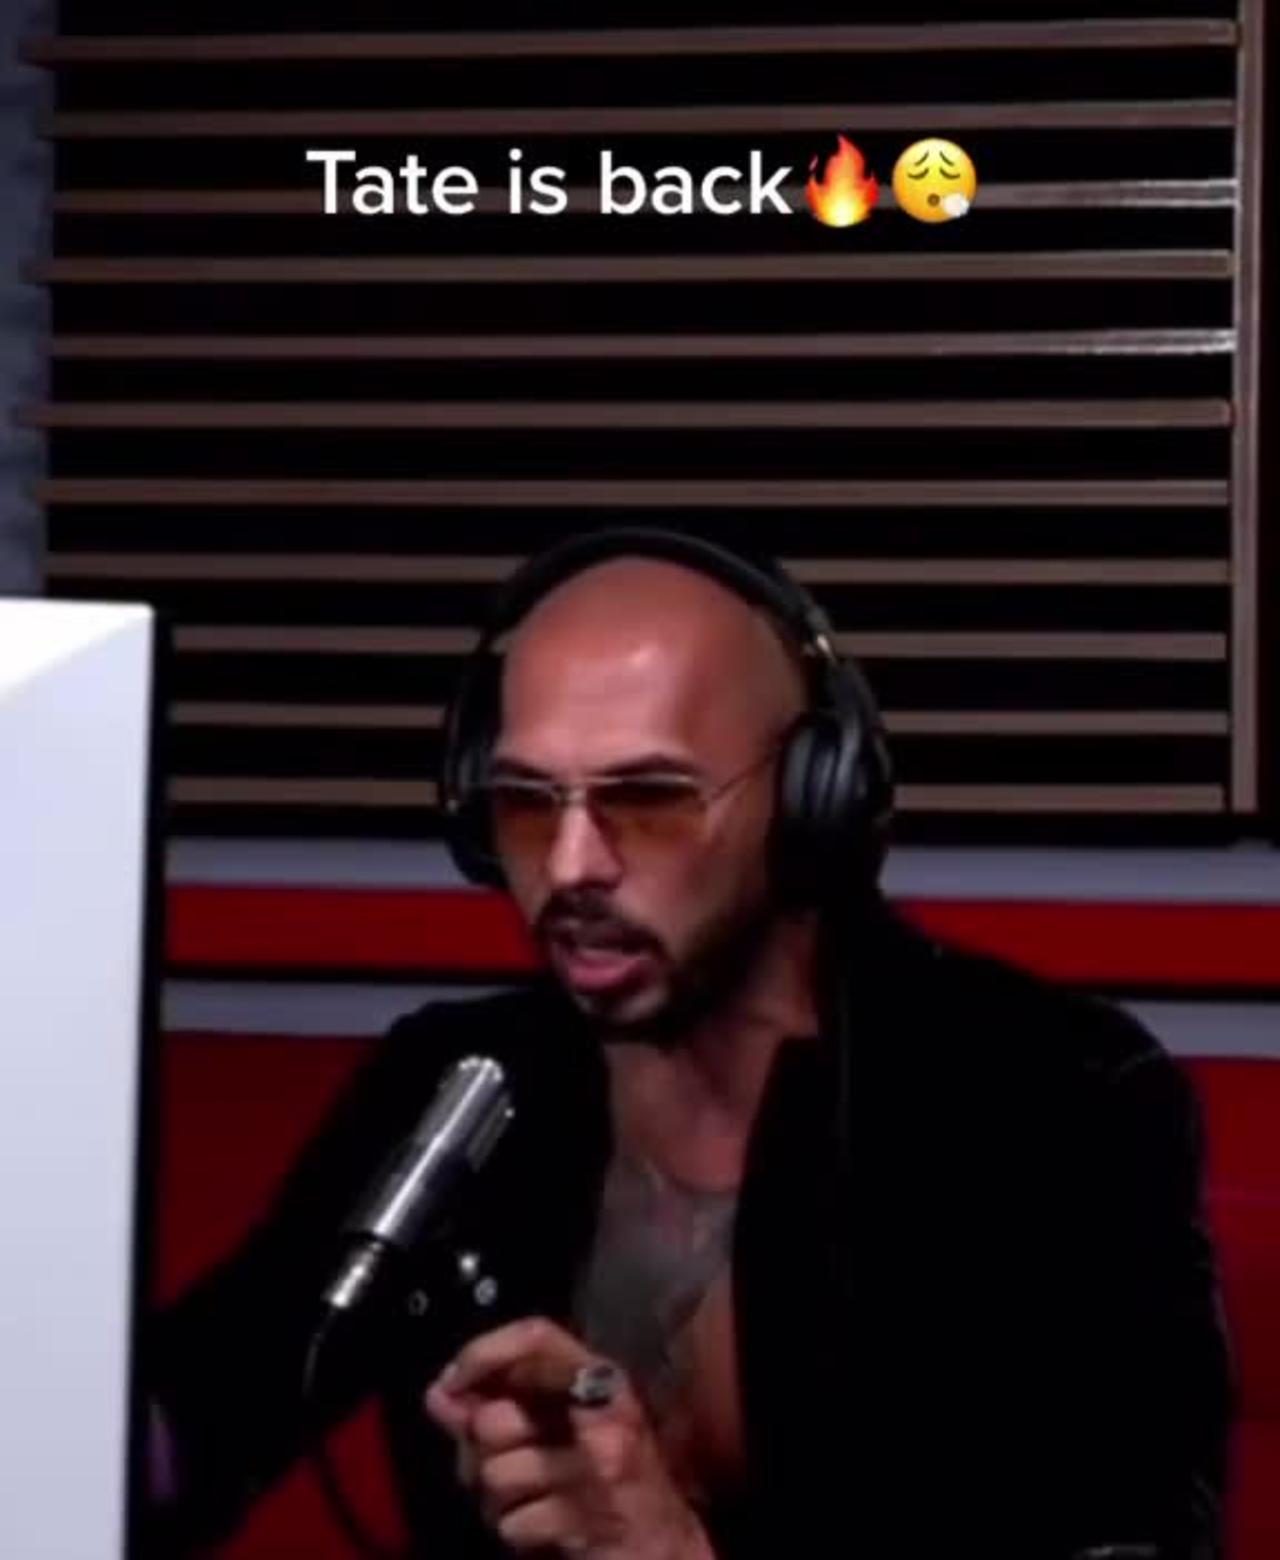 Andrew Tate is back 🔥